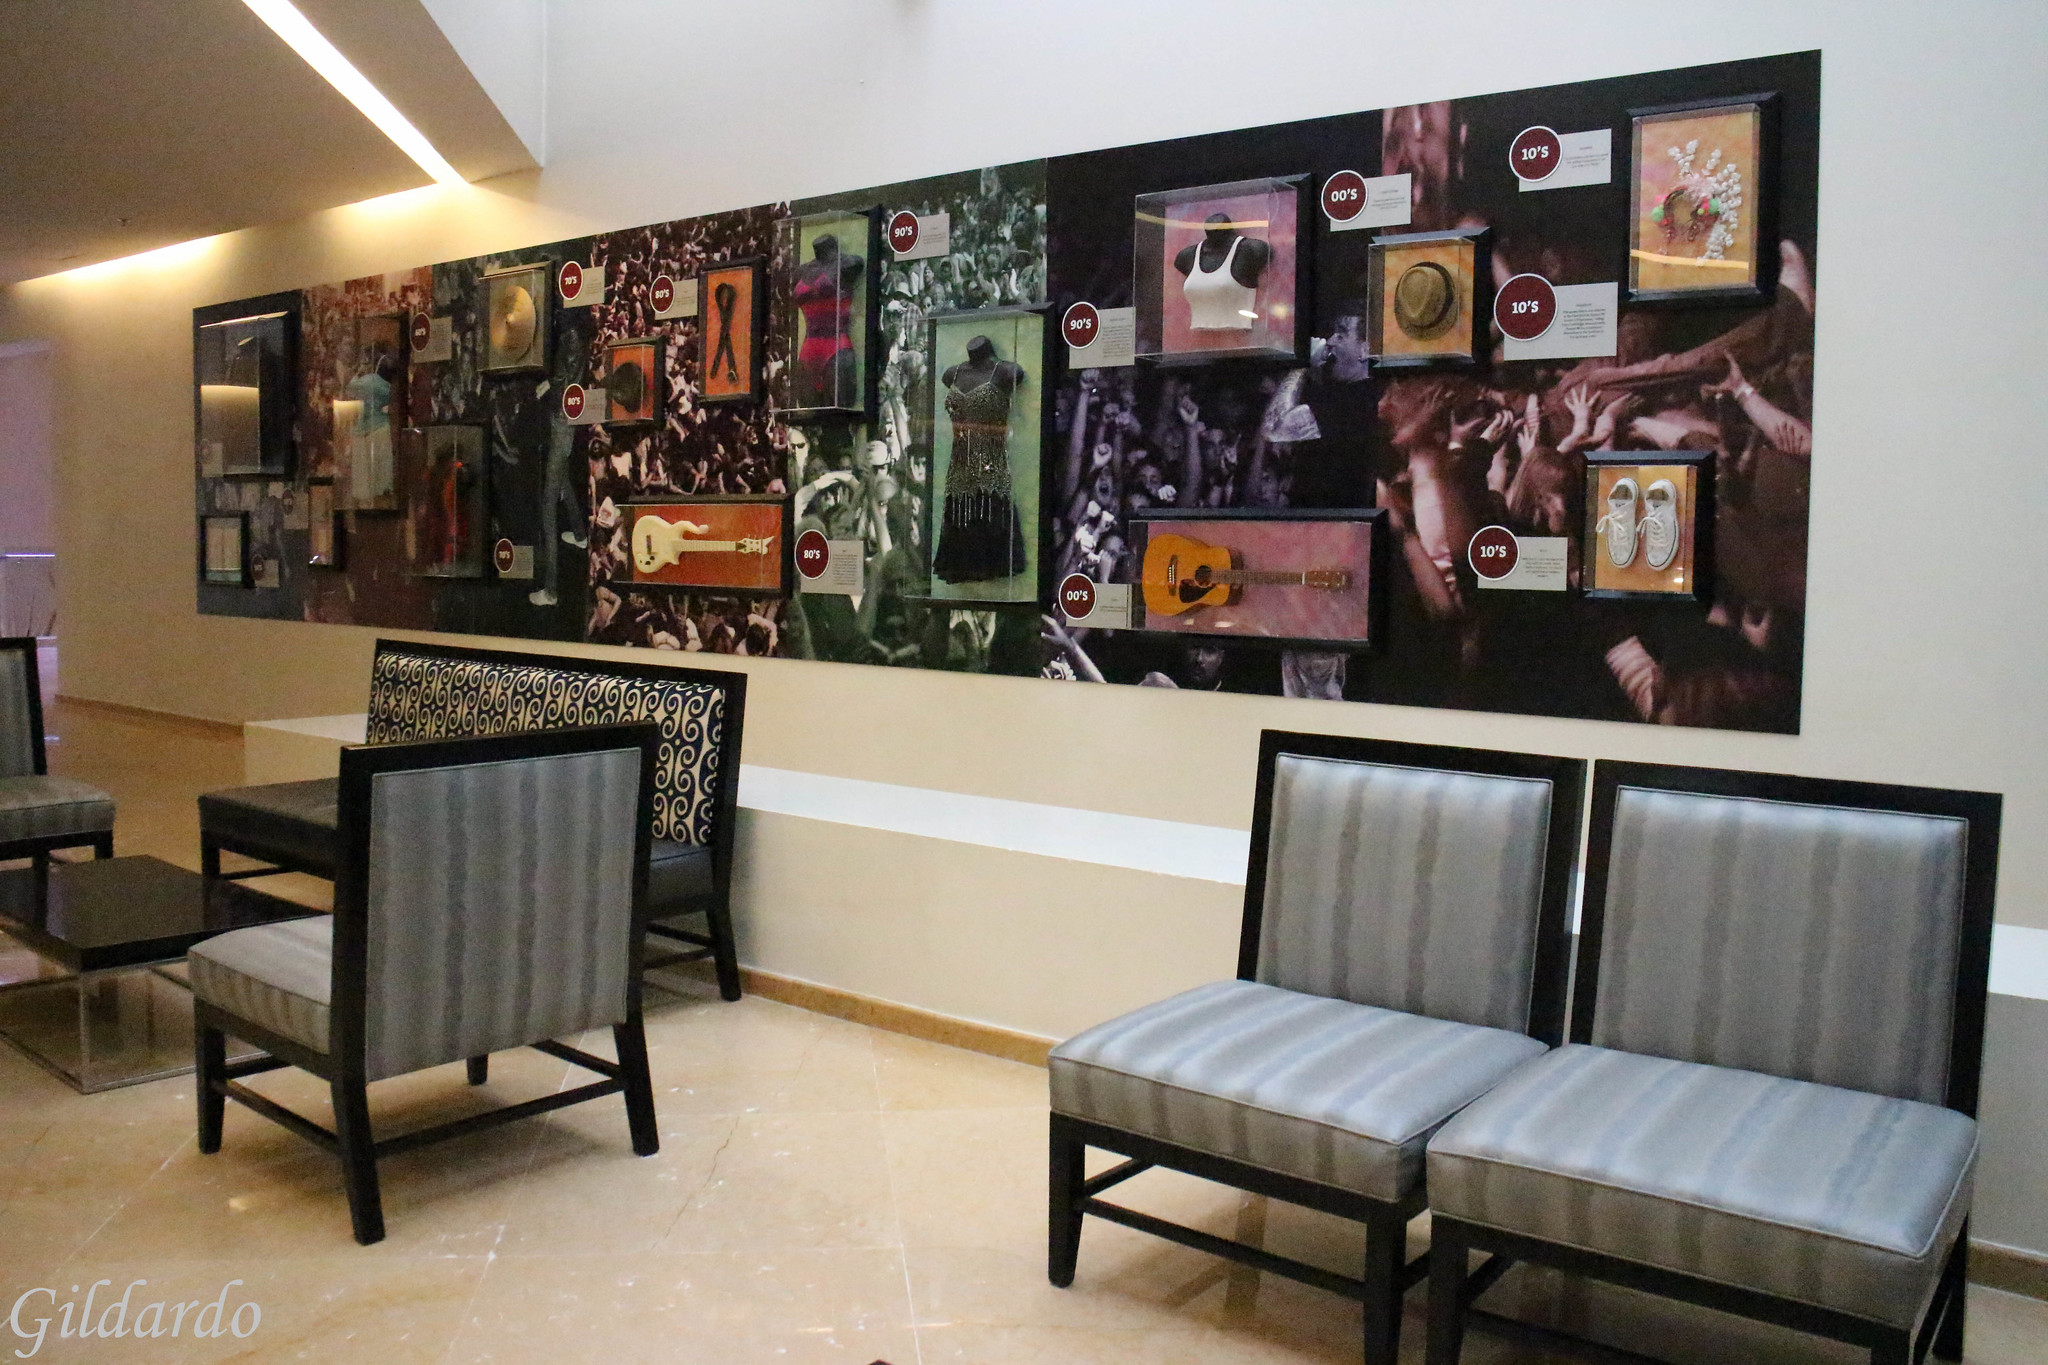 Exhibit of clothing and musical instruments at Hard Rock Hotel Vallarta, one of the best all-inclusive resorts in Mexico